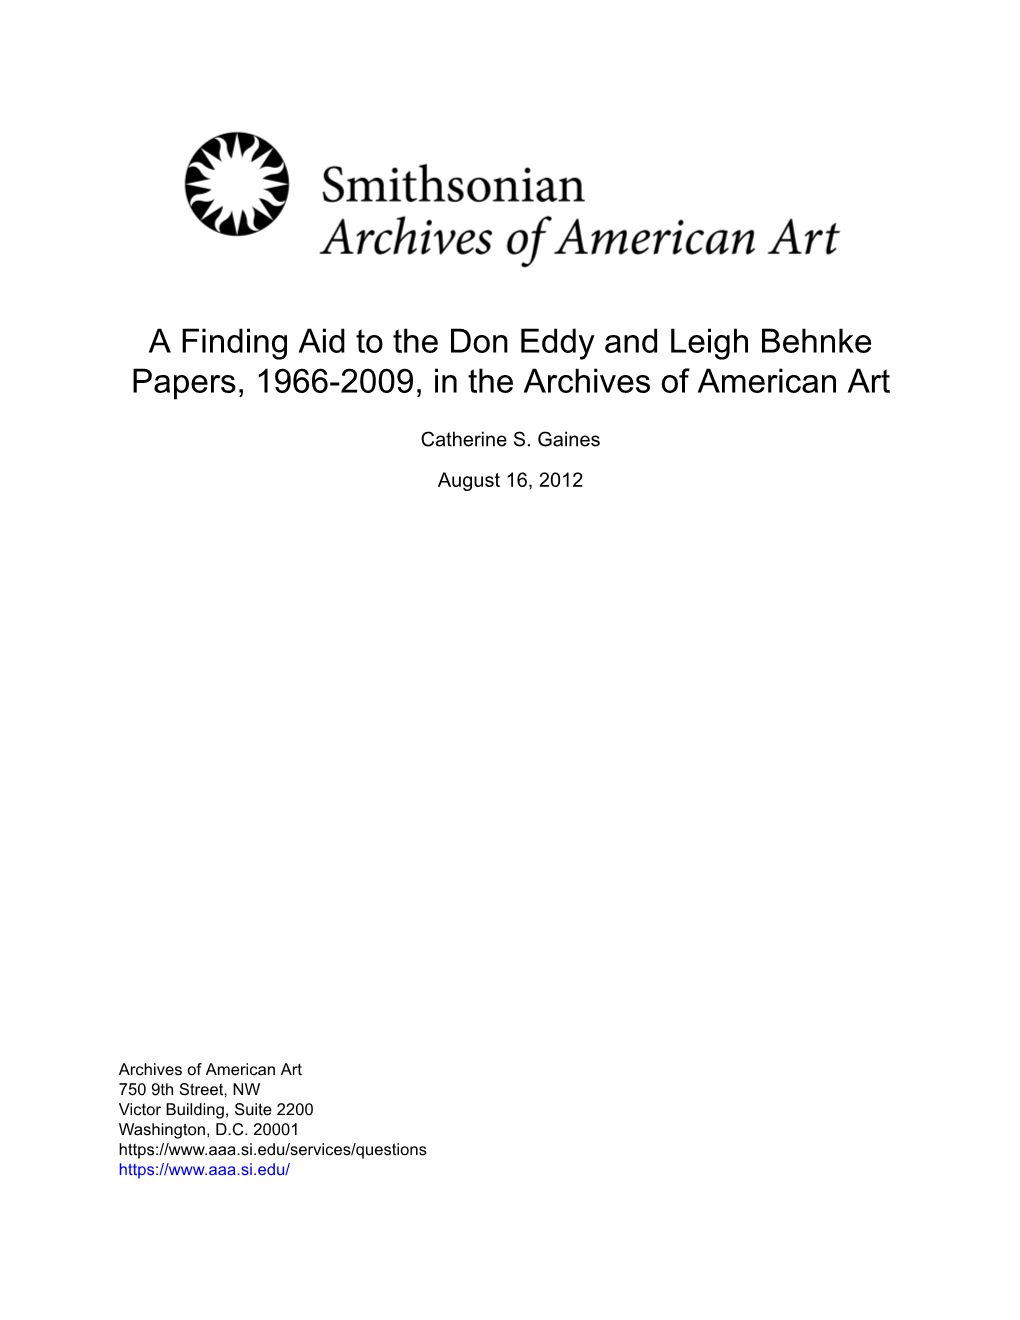 A Finding Aid to the Don Eddy and Leigh Behnke Papers, 1966-2009, in the Archives of American Art